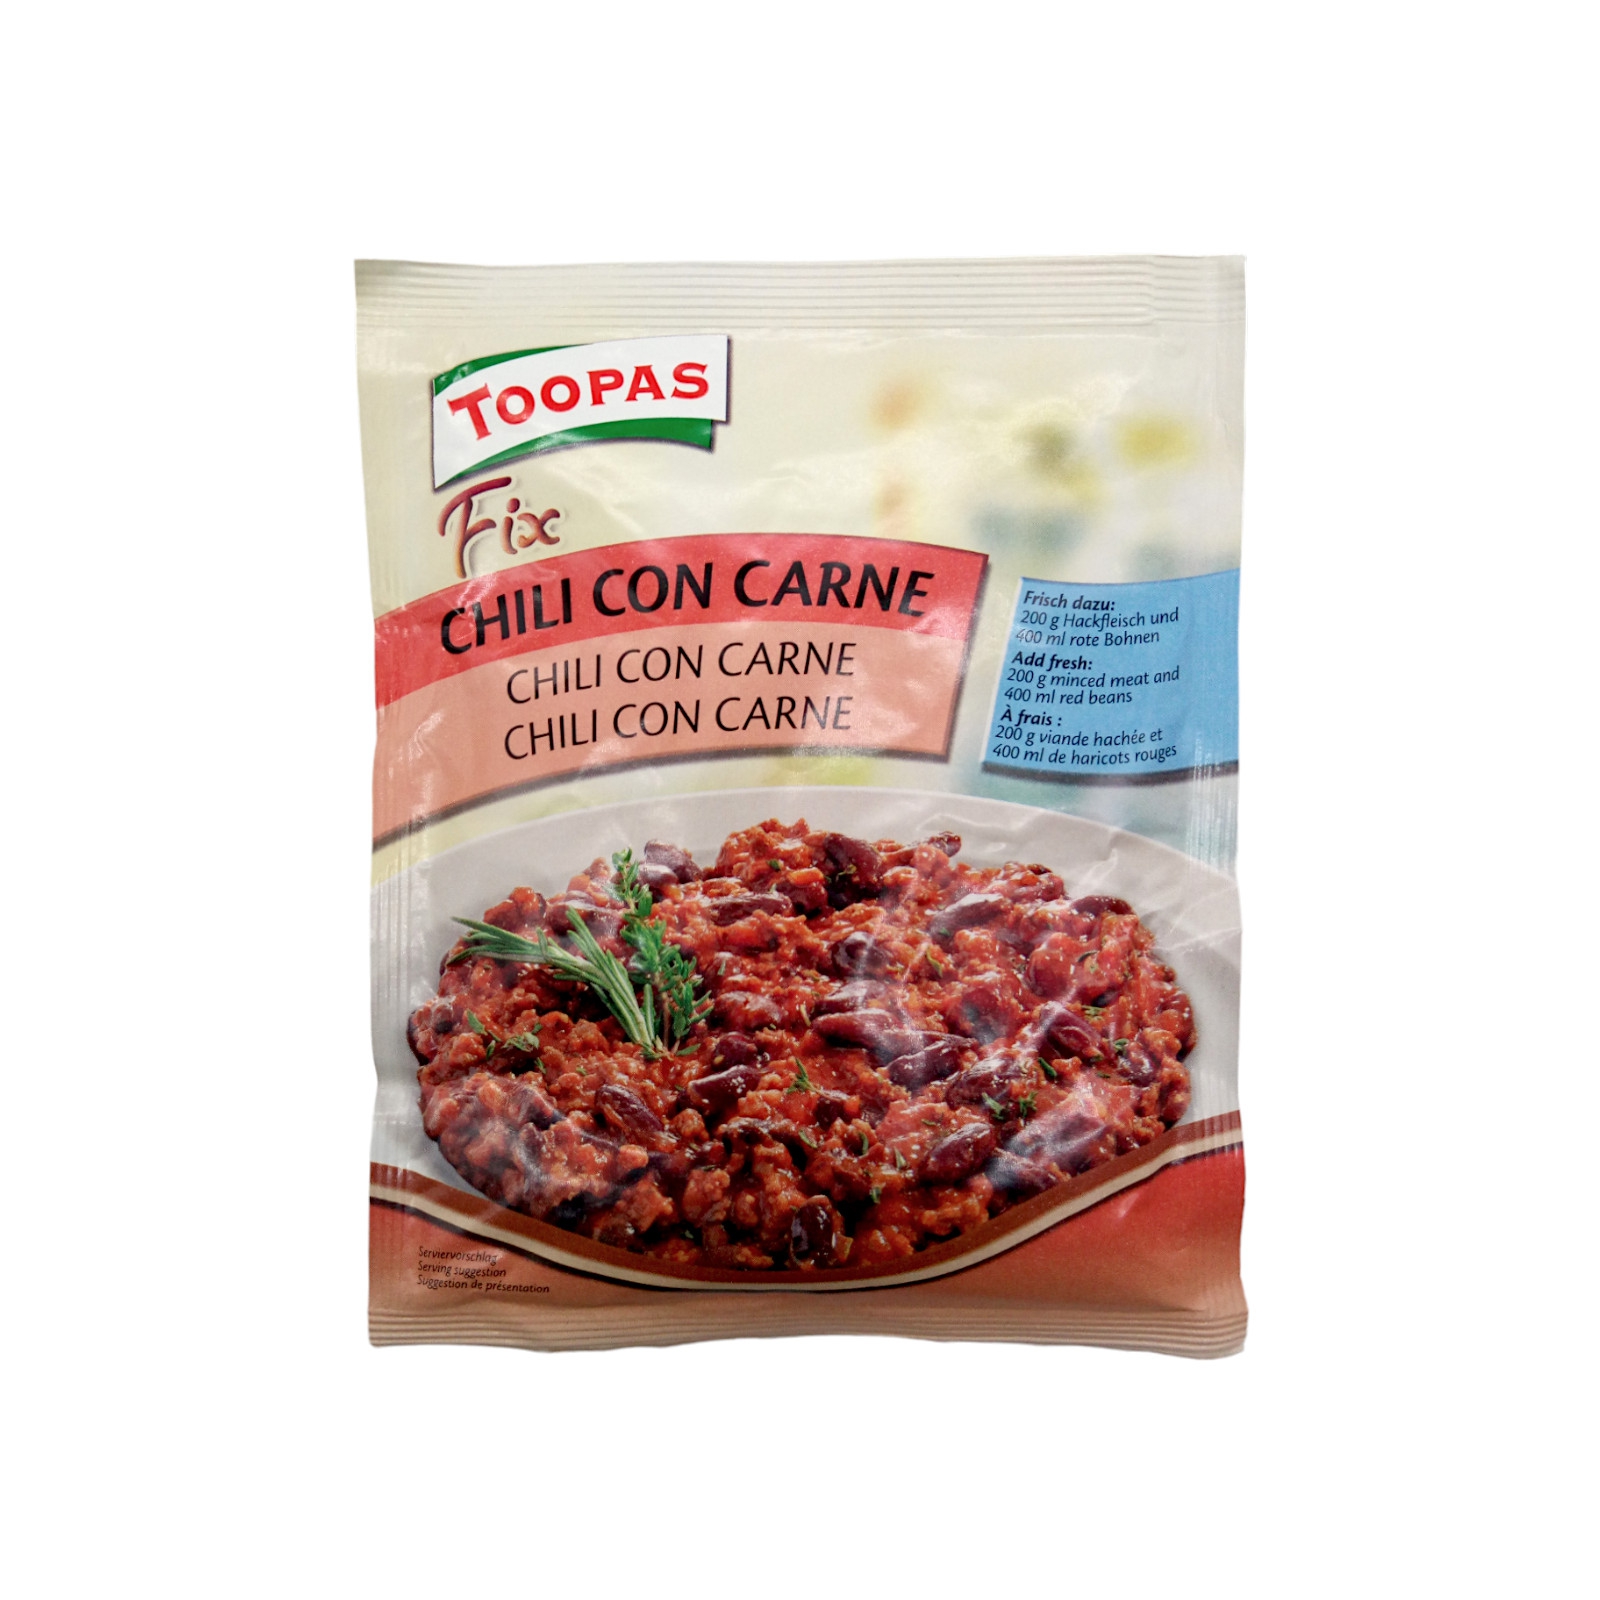 Toopas Chili Con Carne 35g